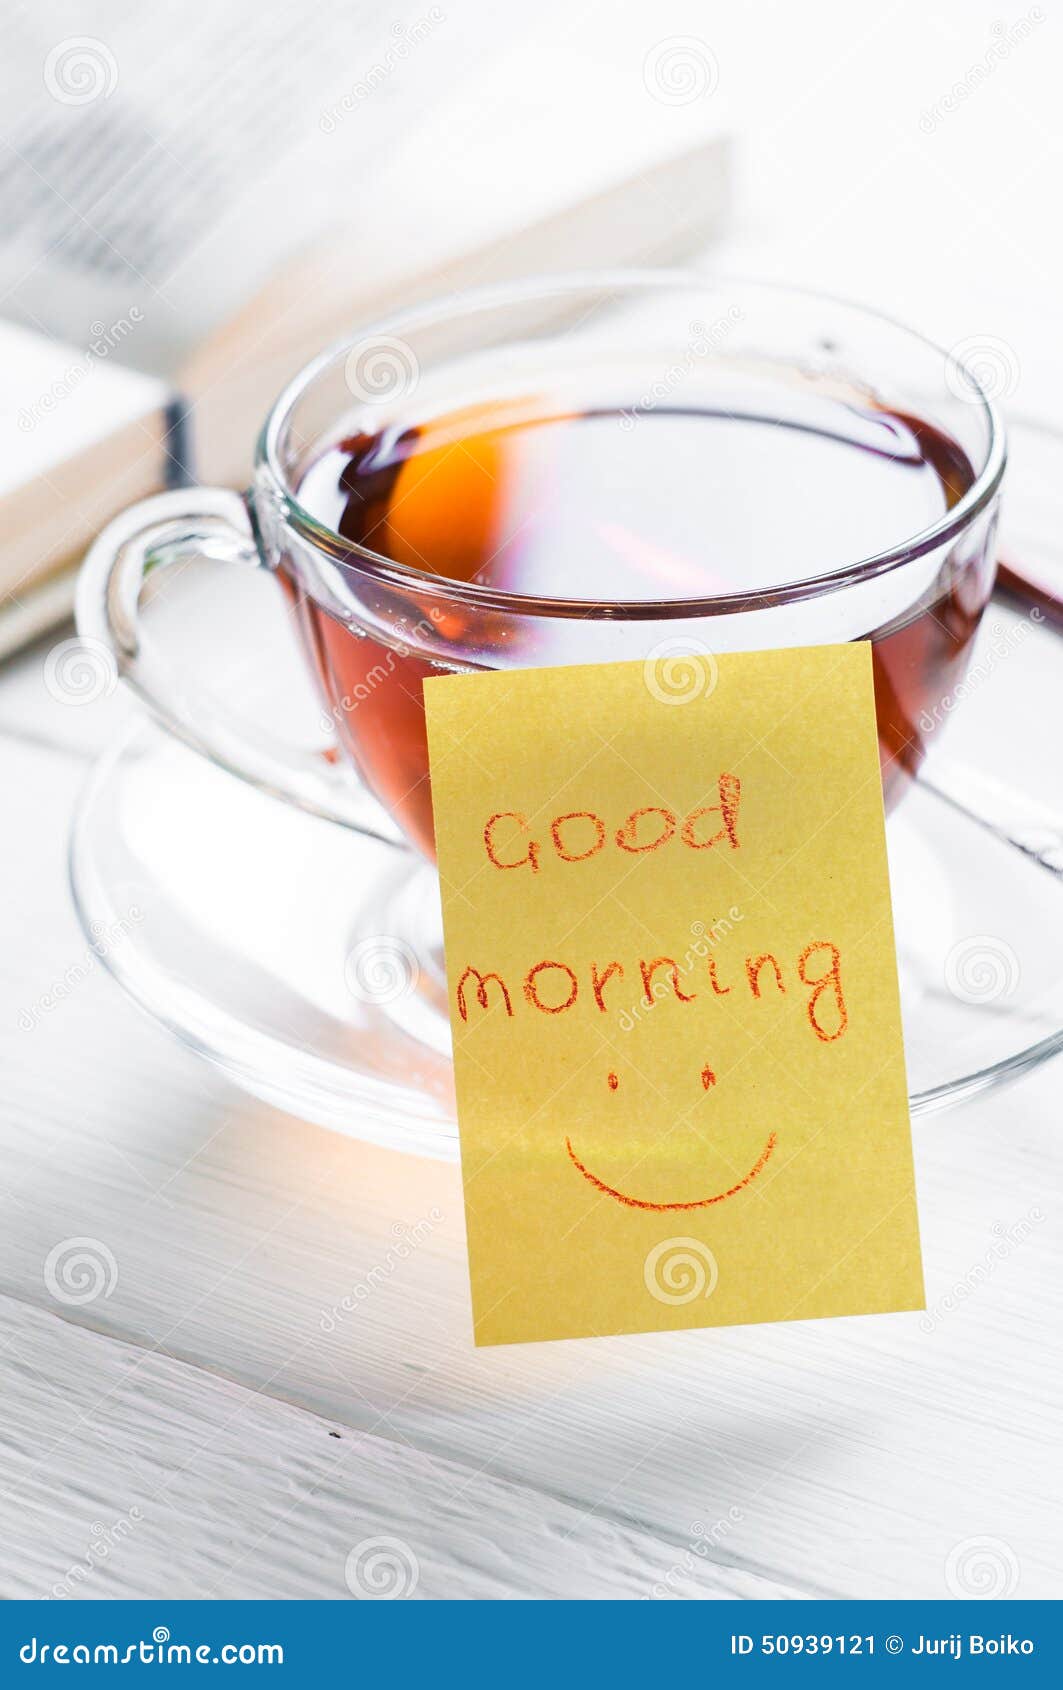 Good Morning with Smile and Cup Tea Stock Image - Image of friends ...